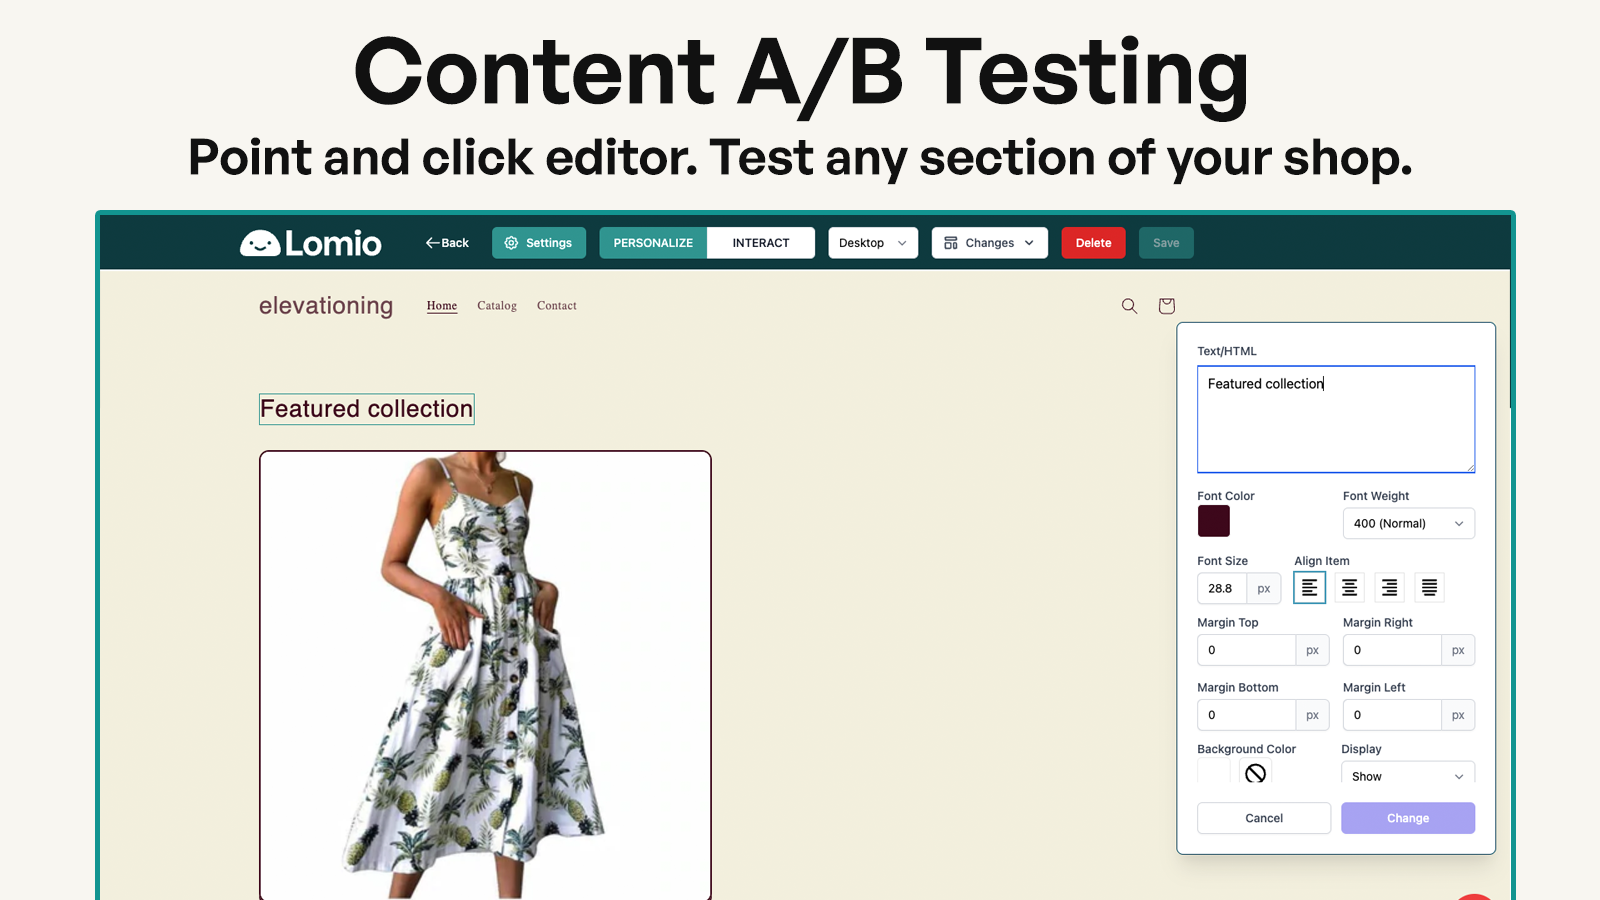 A/B test any section of your store